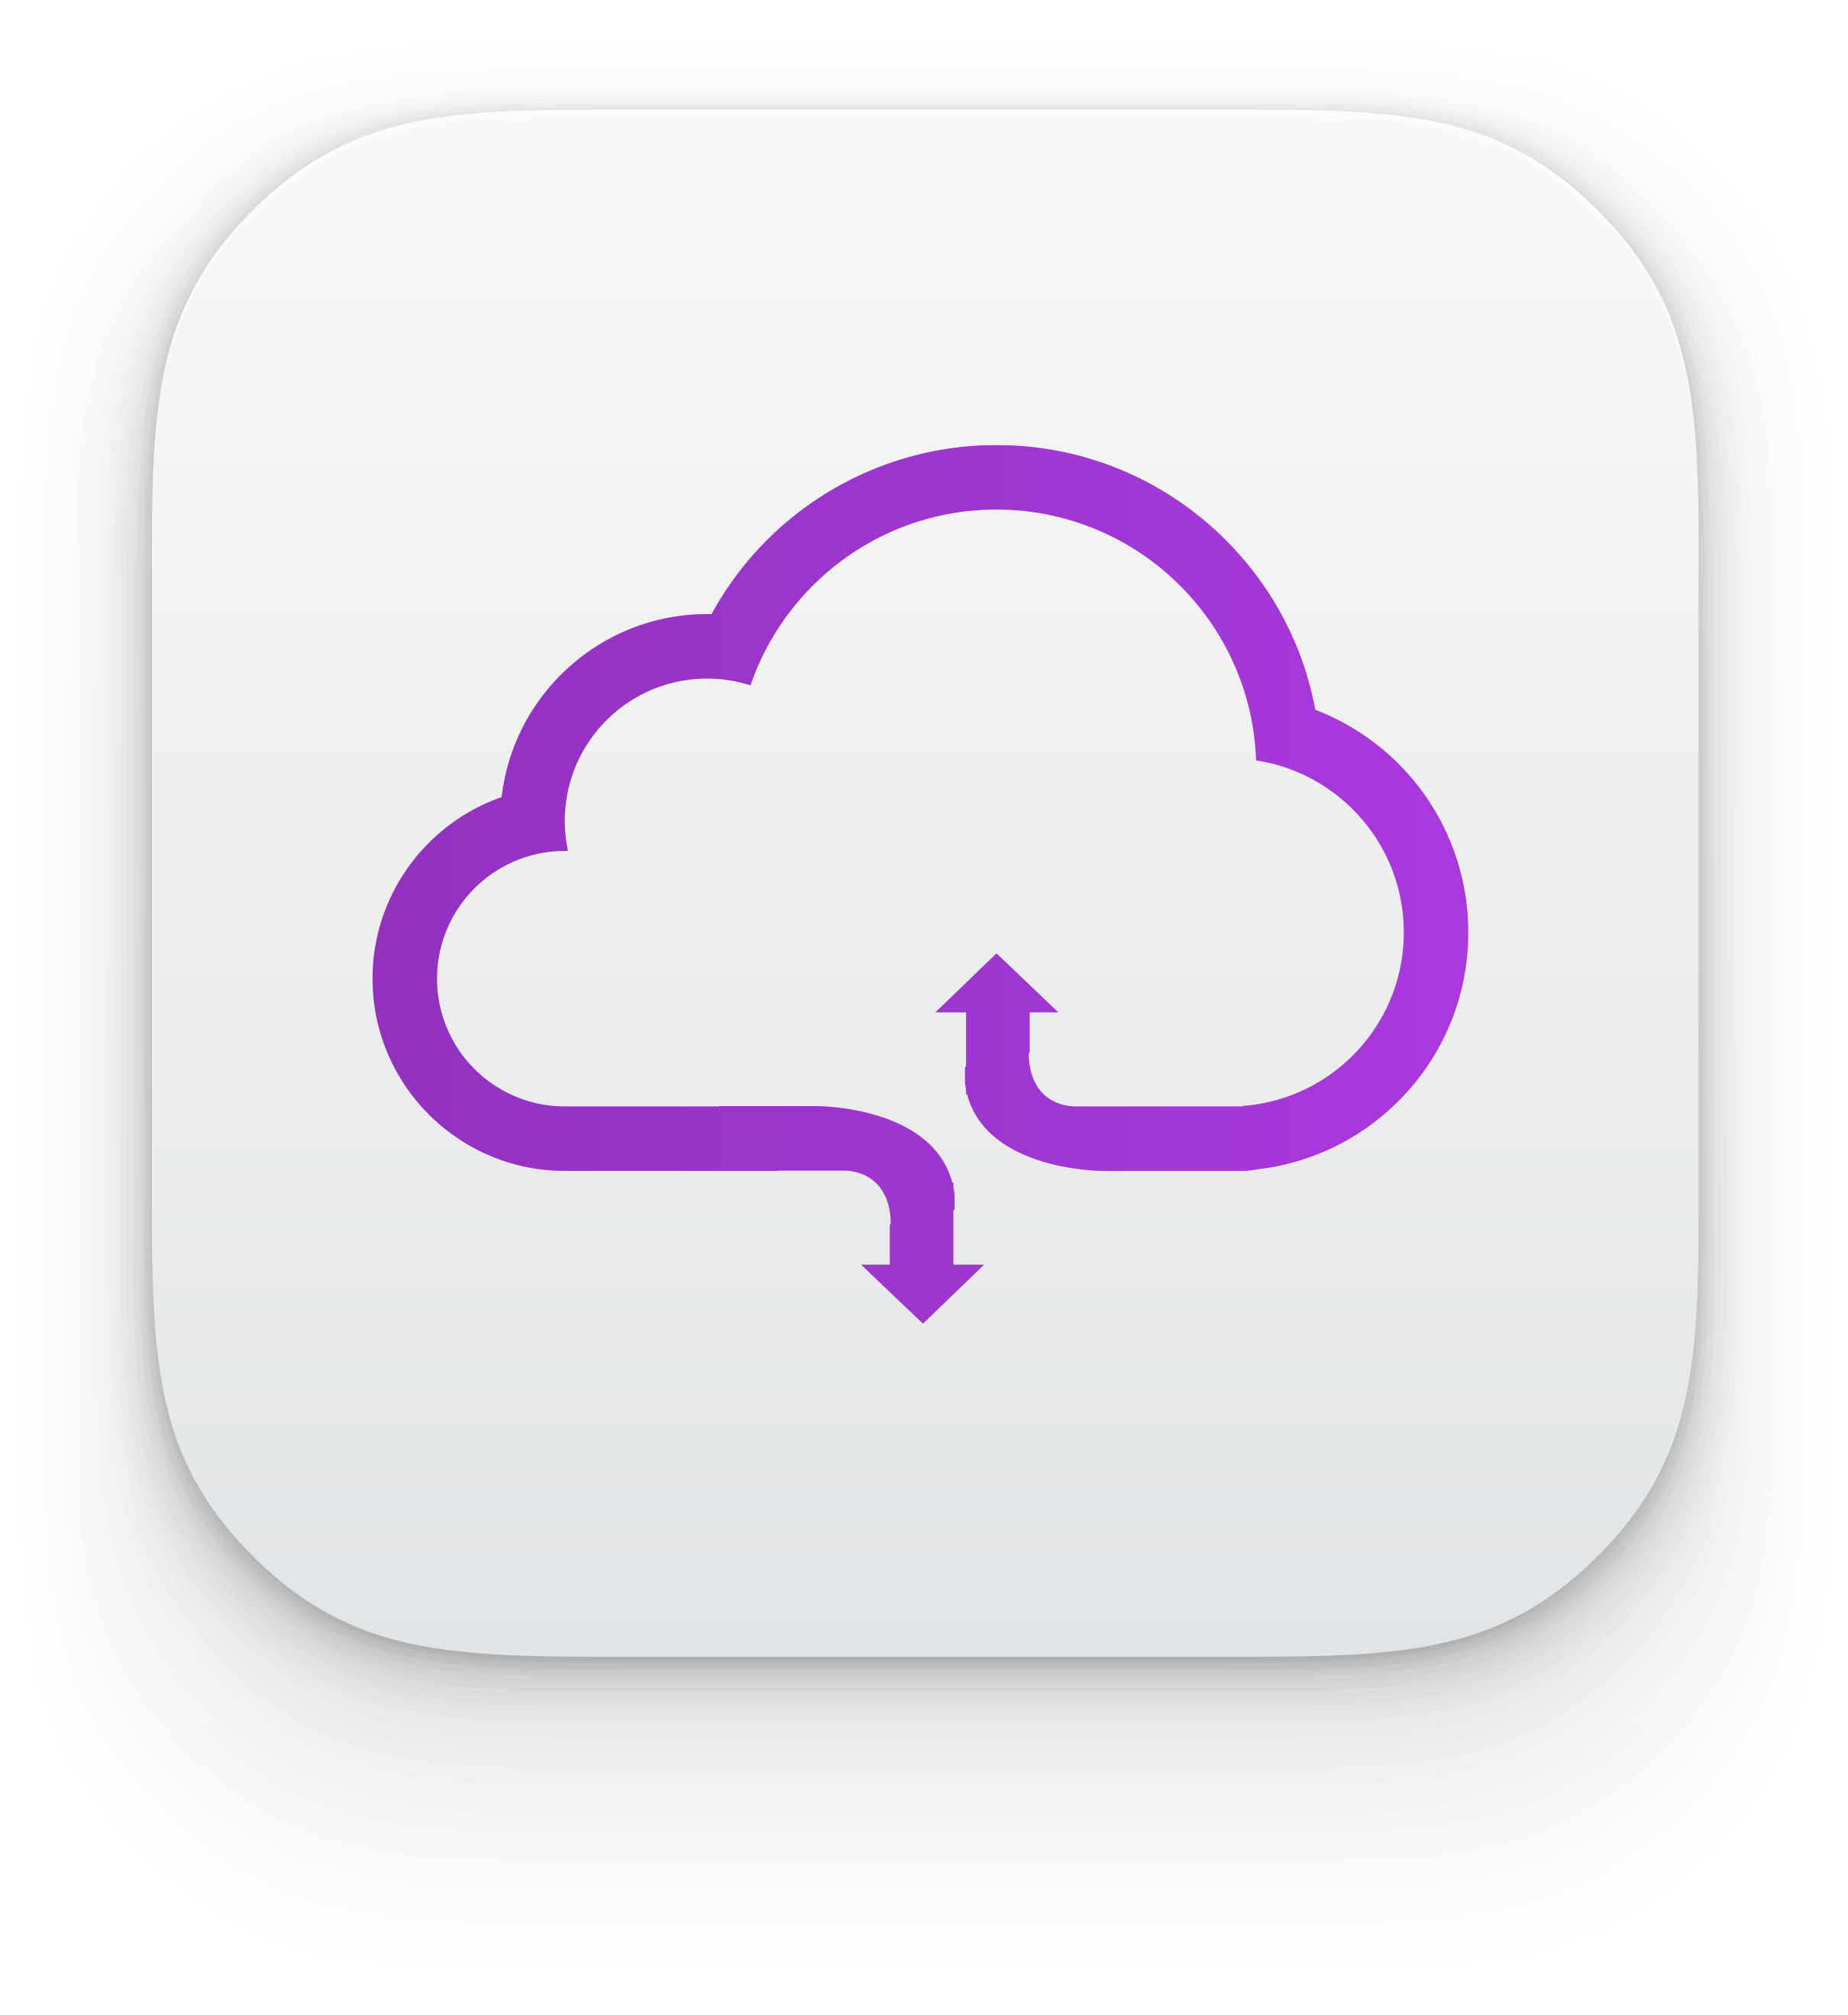 Cloud upload/download icon